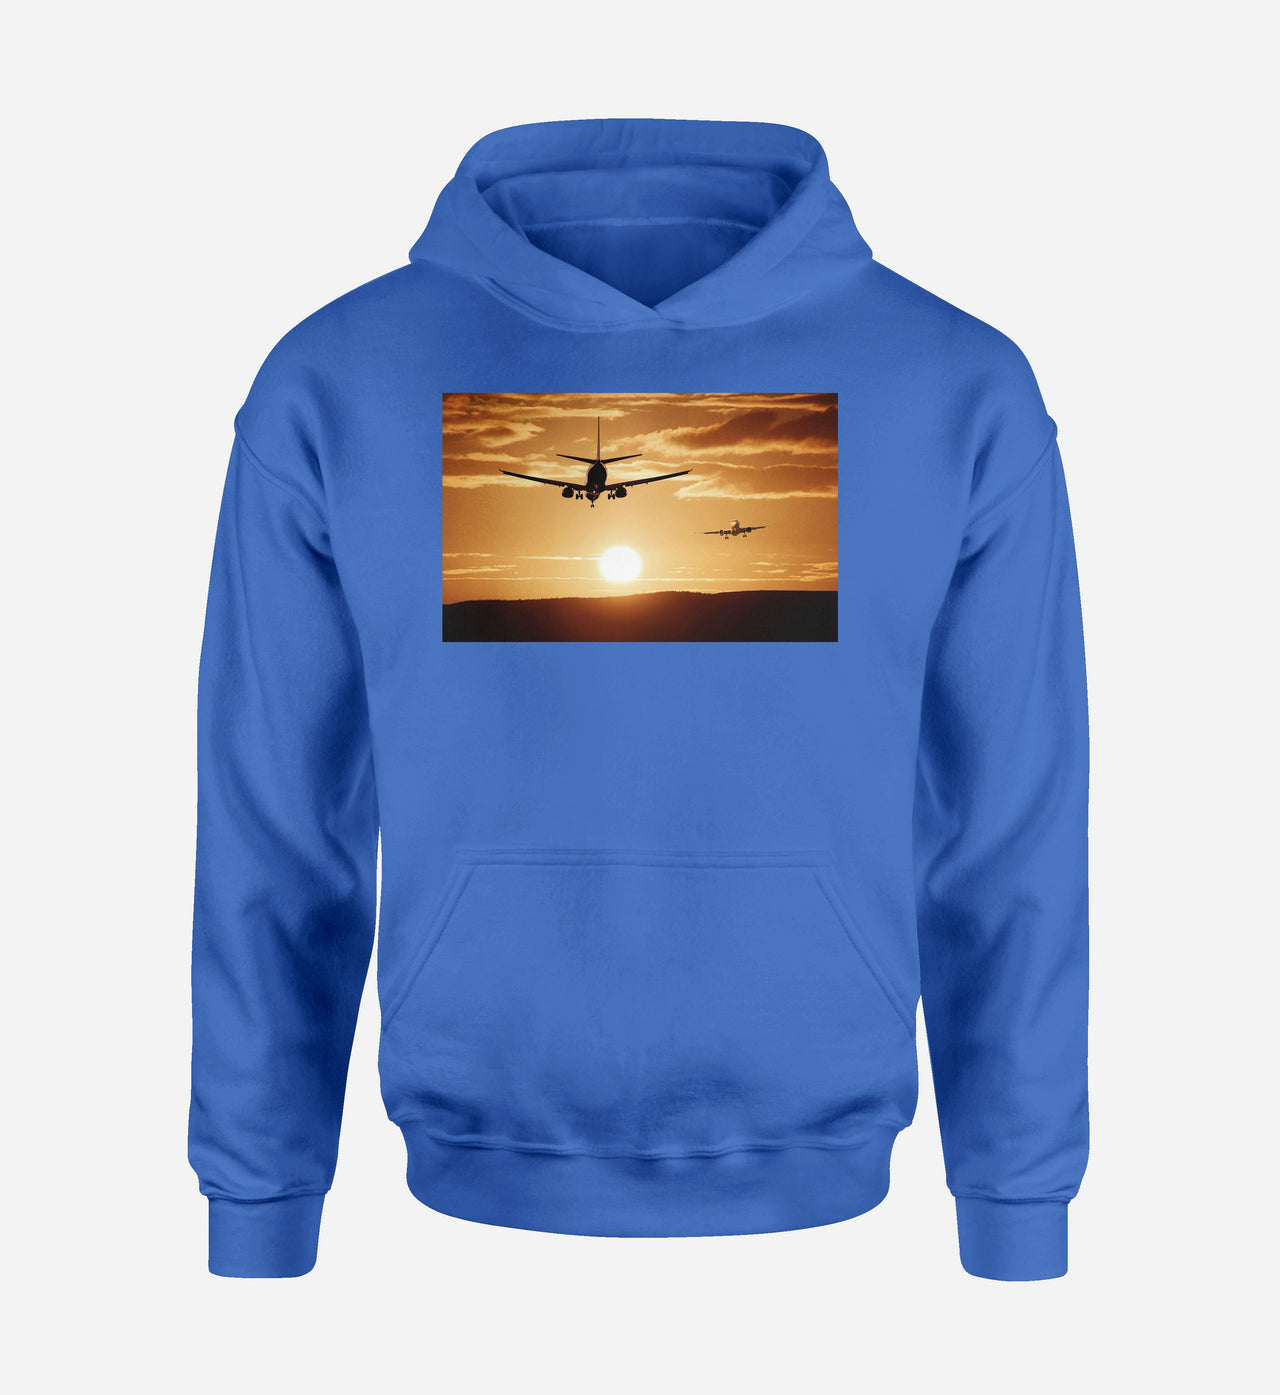 Two Aeroplanes During Sunset Designed Hoodies